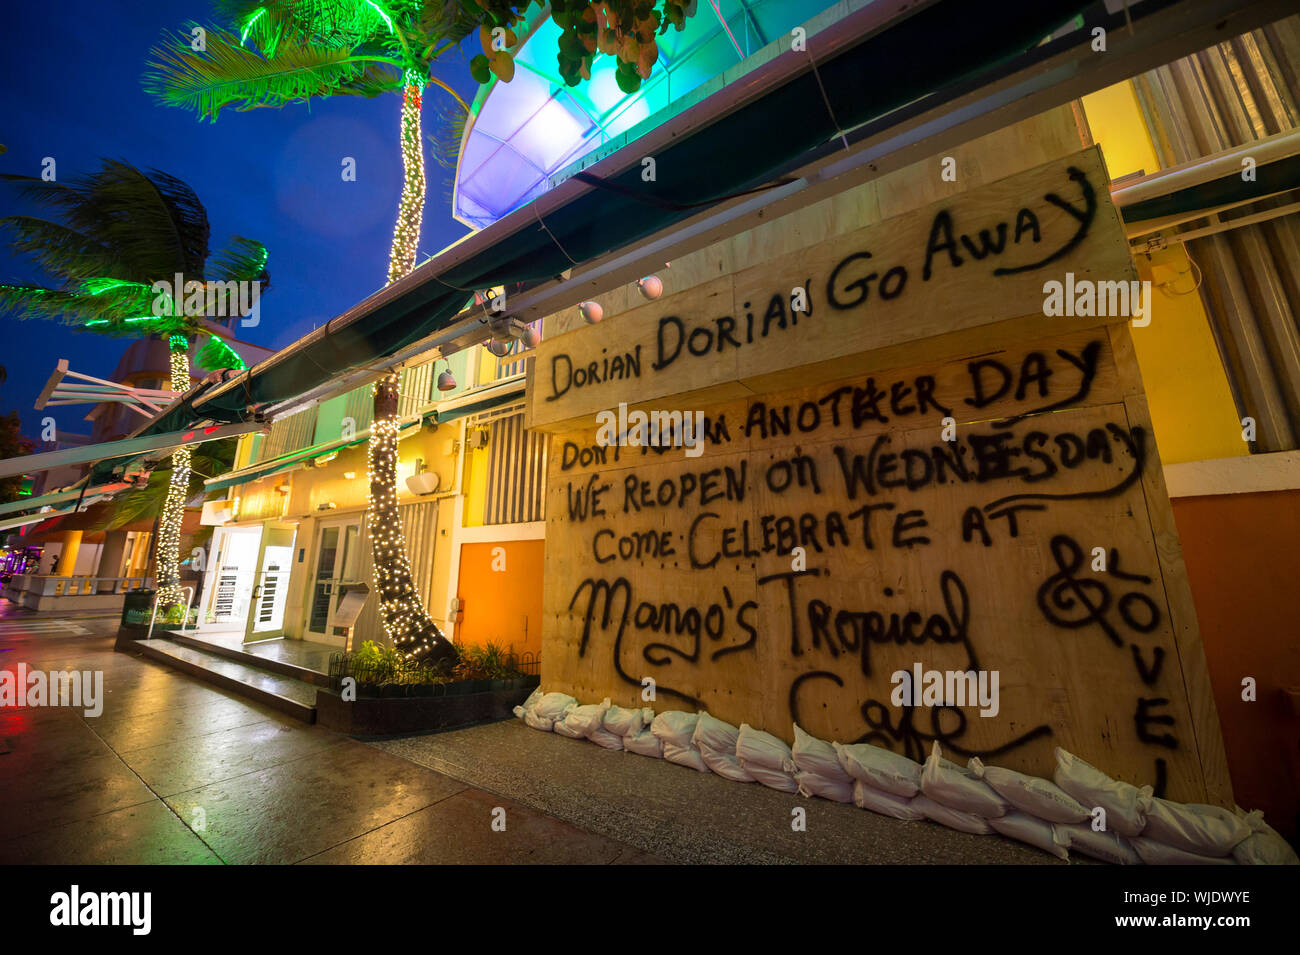 MIAMI - SEPTEMBER 02, 2019: Signs on Mango's nightblub on Ocean Drive, boarded up for Hurricane Dorian, inform Labor Day visitors of reopening plans. Stock Photo